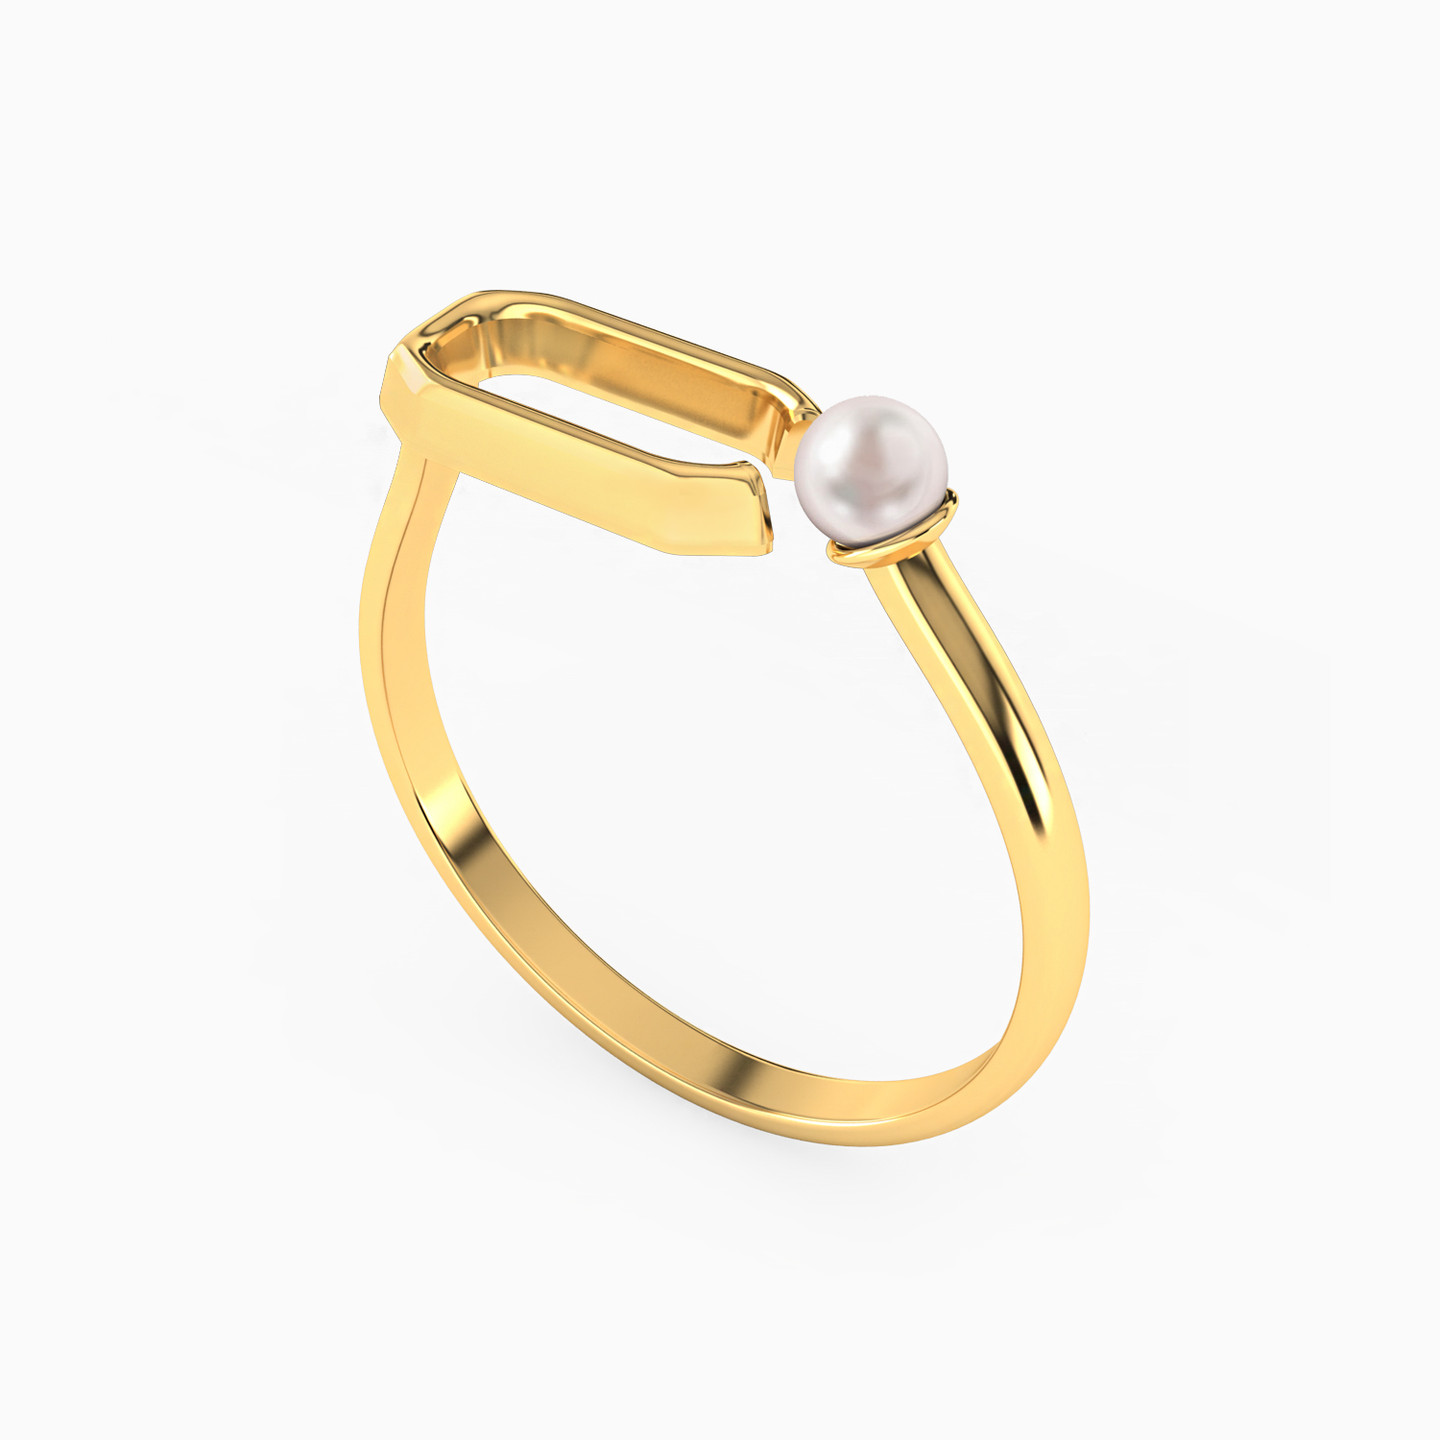 Rectangle Shaped Pearls Statement Ring in 18K Gold - 2